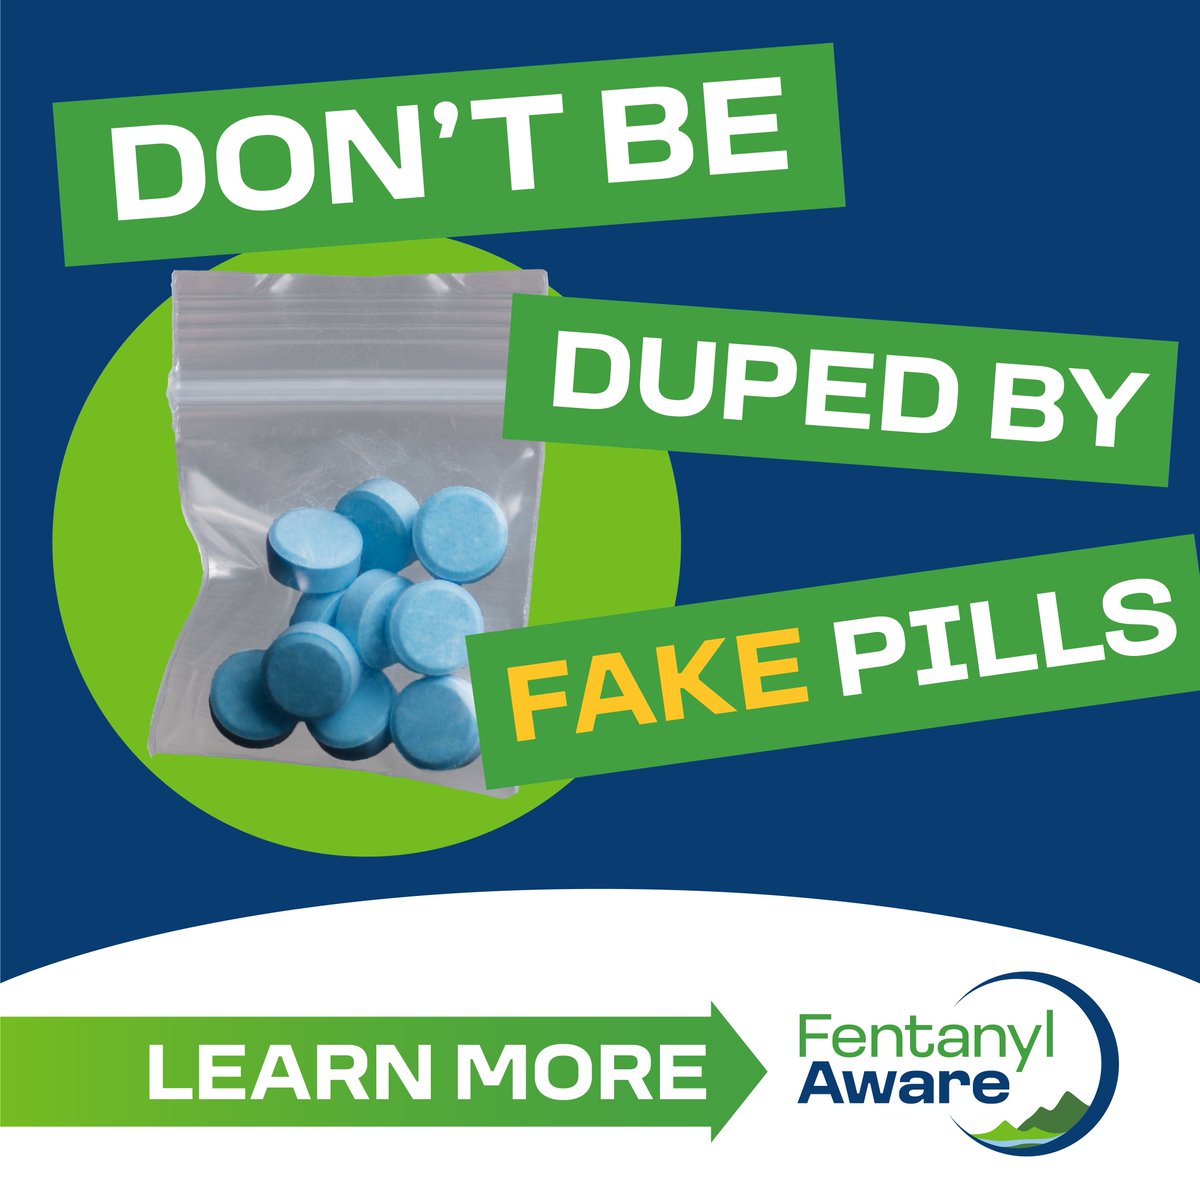 Fake prescription pills have flooded the market. See, drug dealers are businesspeople, and they follow the money. As long as there is a demand for Xanax, Oxycodone and the like, they will find the easiest, most profitable way to supply them. Learn more: ow.ly/Zoyz50RCeRh